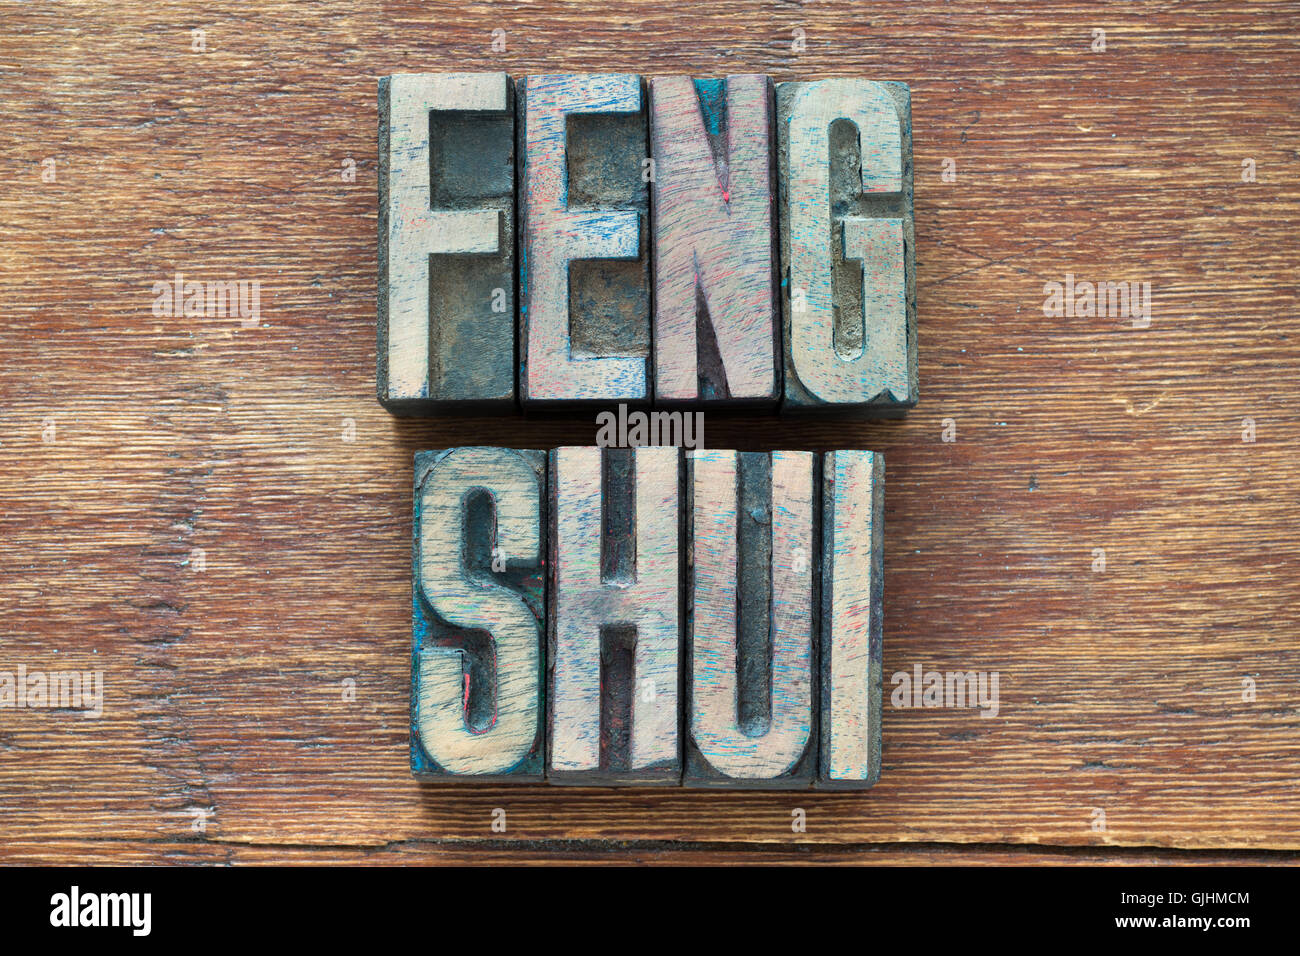 feng shui phrase made from wooden letterpress type on grunge wood Stock Photo